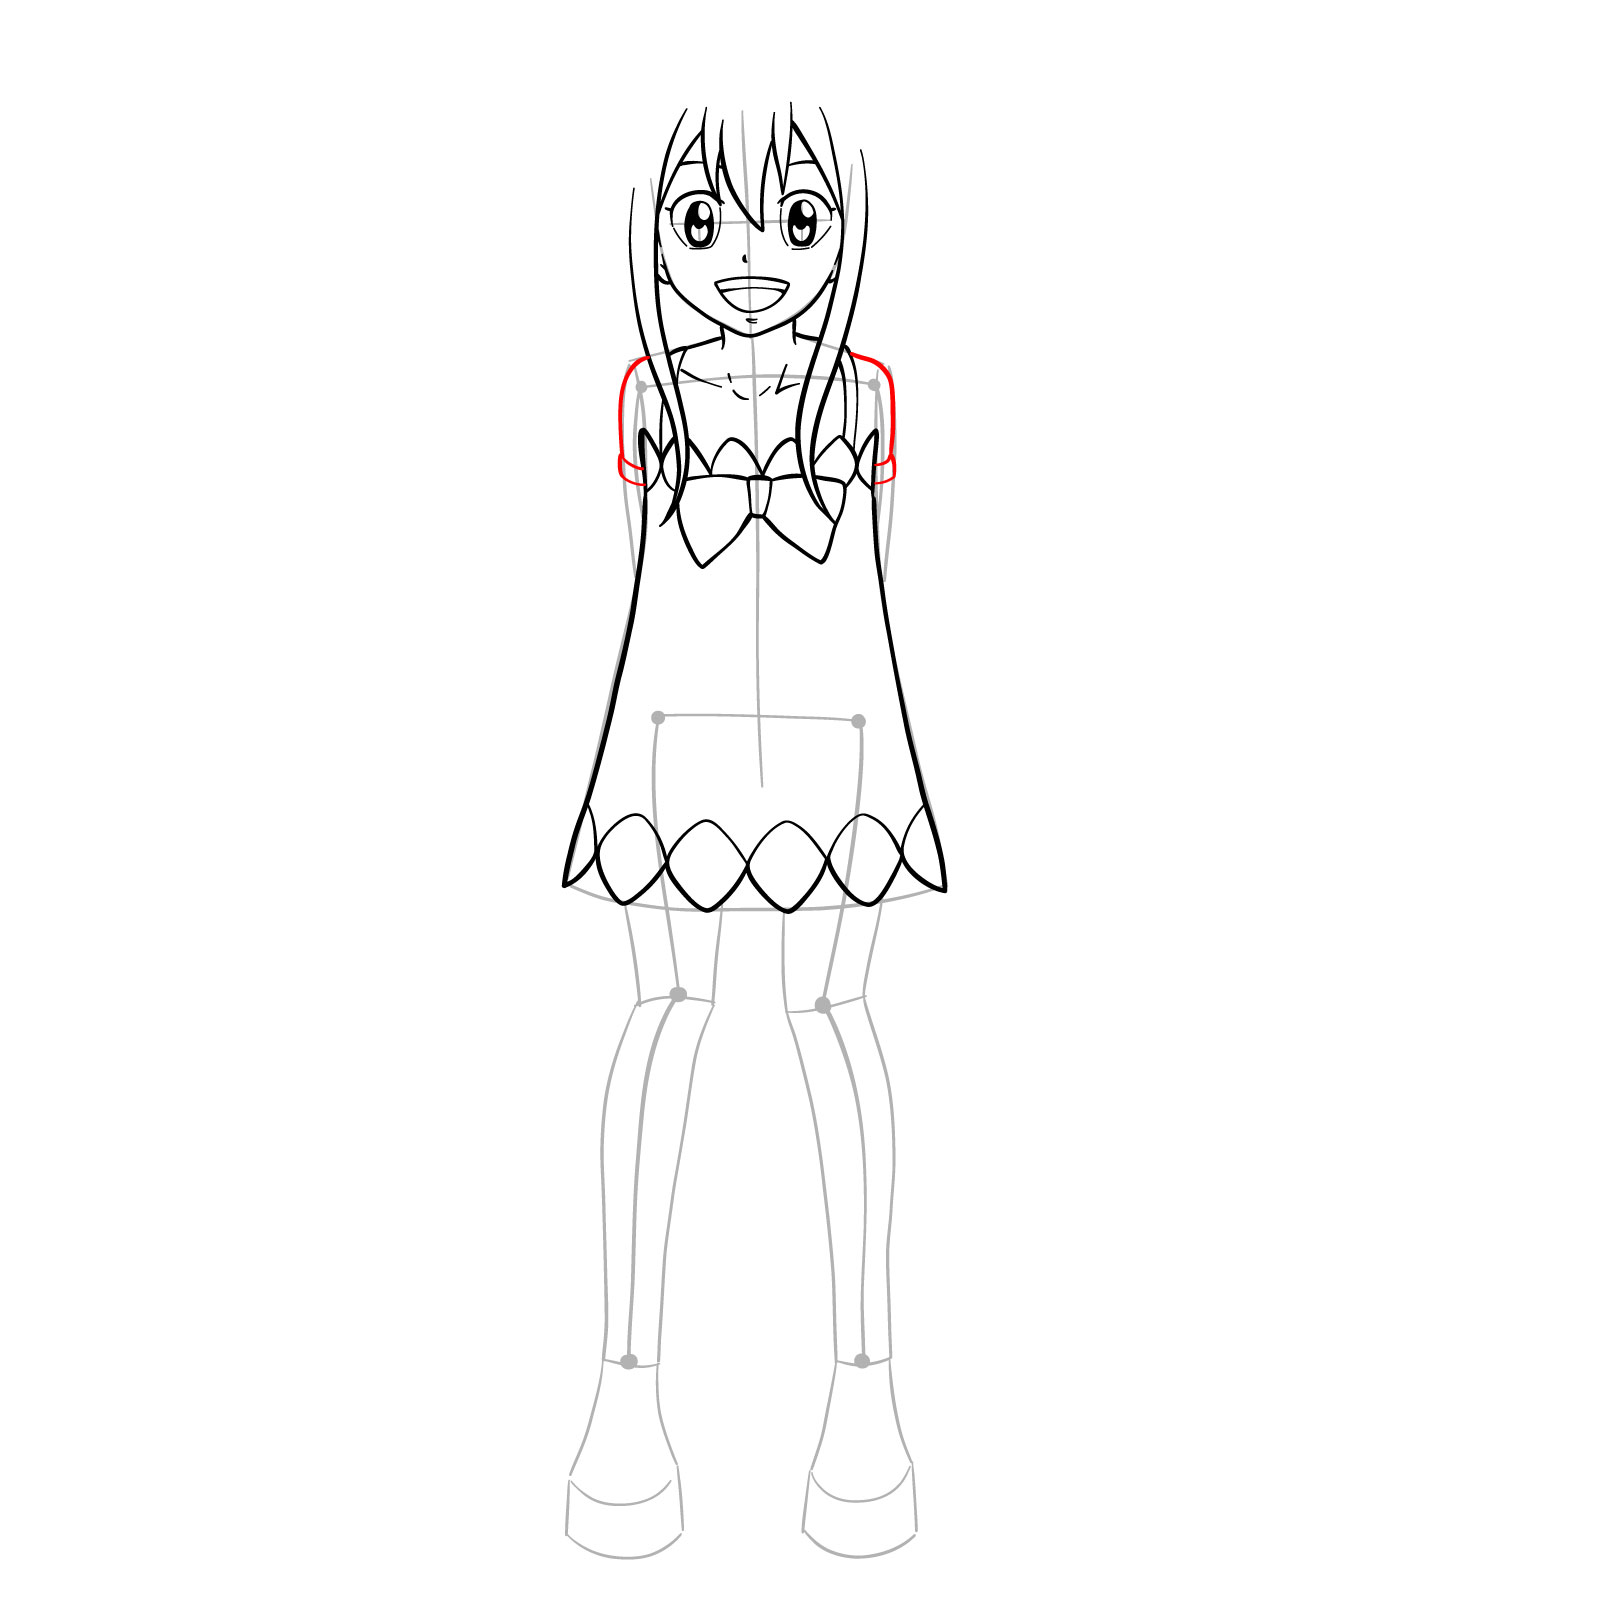 How to draw Wendy Marvell from Fairy Tail - step 14